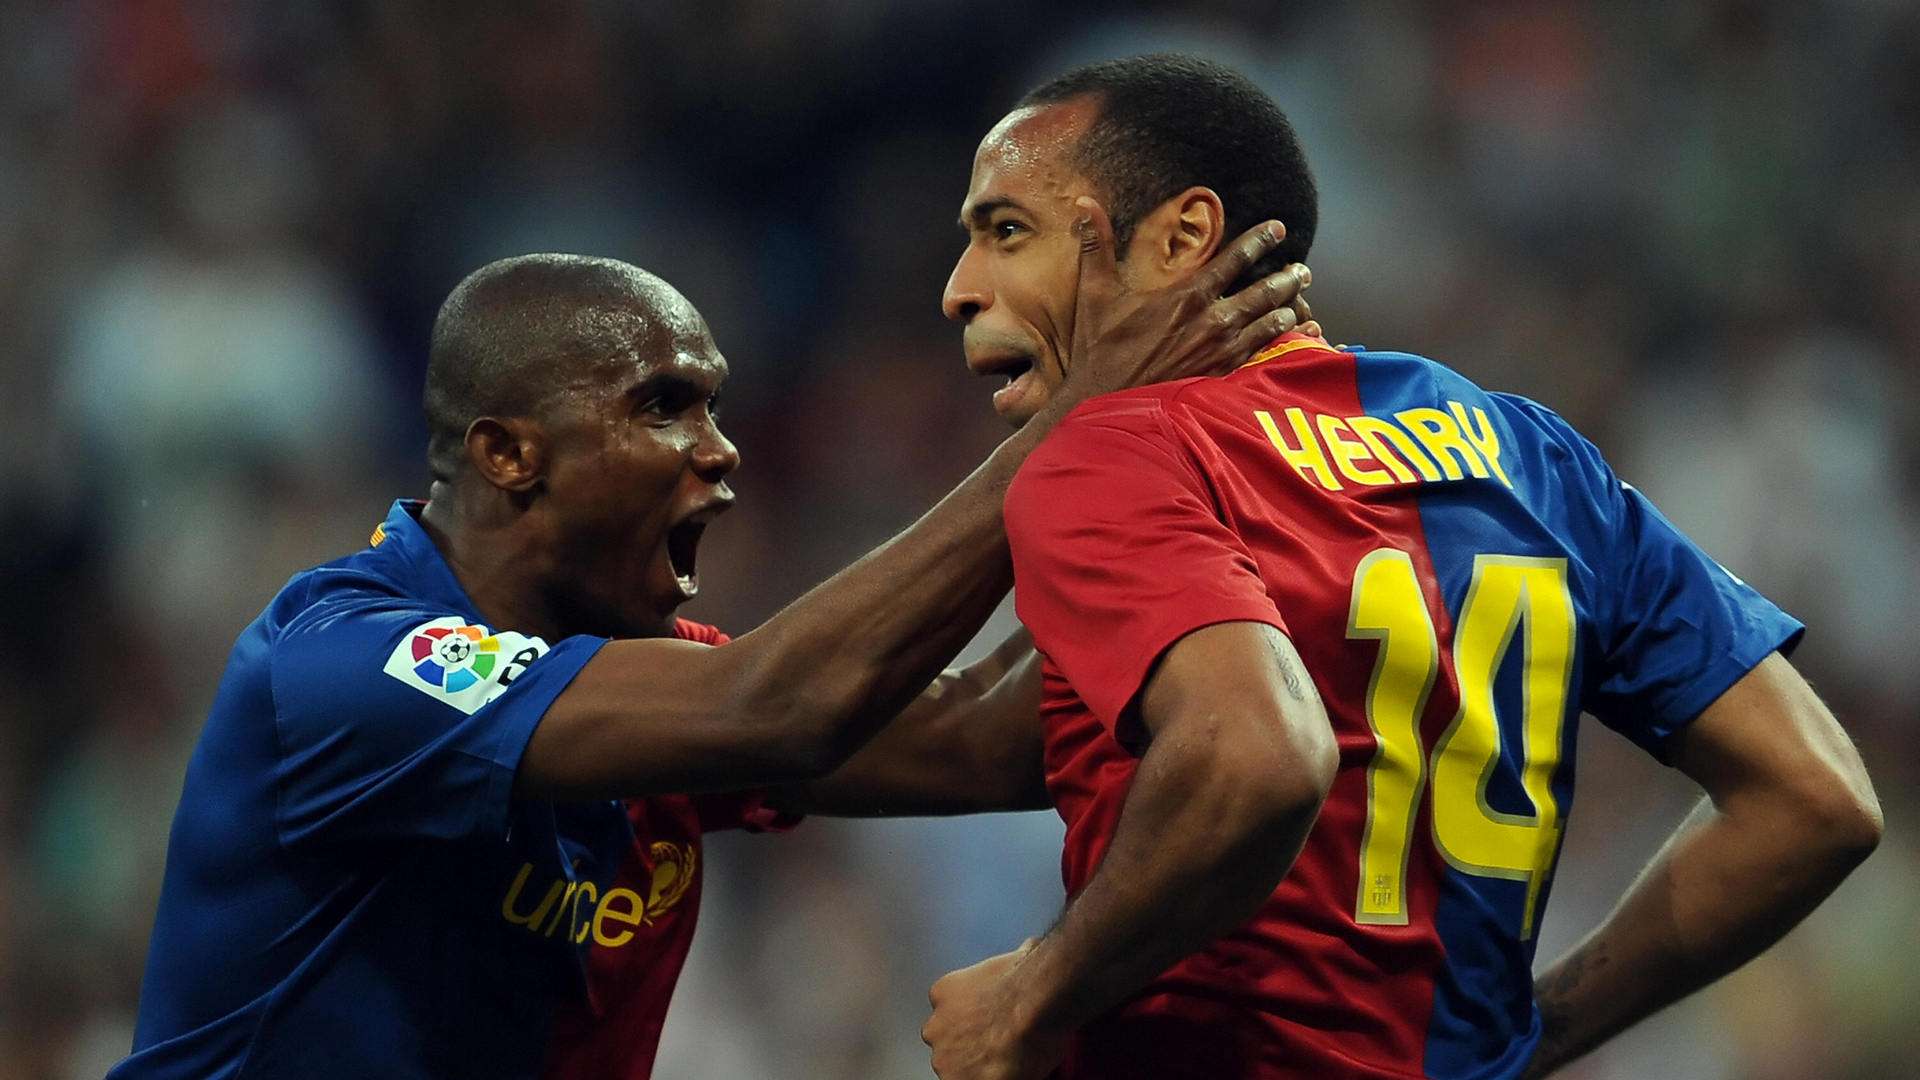 Samuel Eto'o Thierry Henry Barcelona May 2, 2009 in Madrid